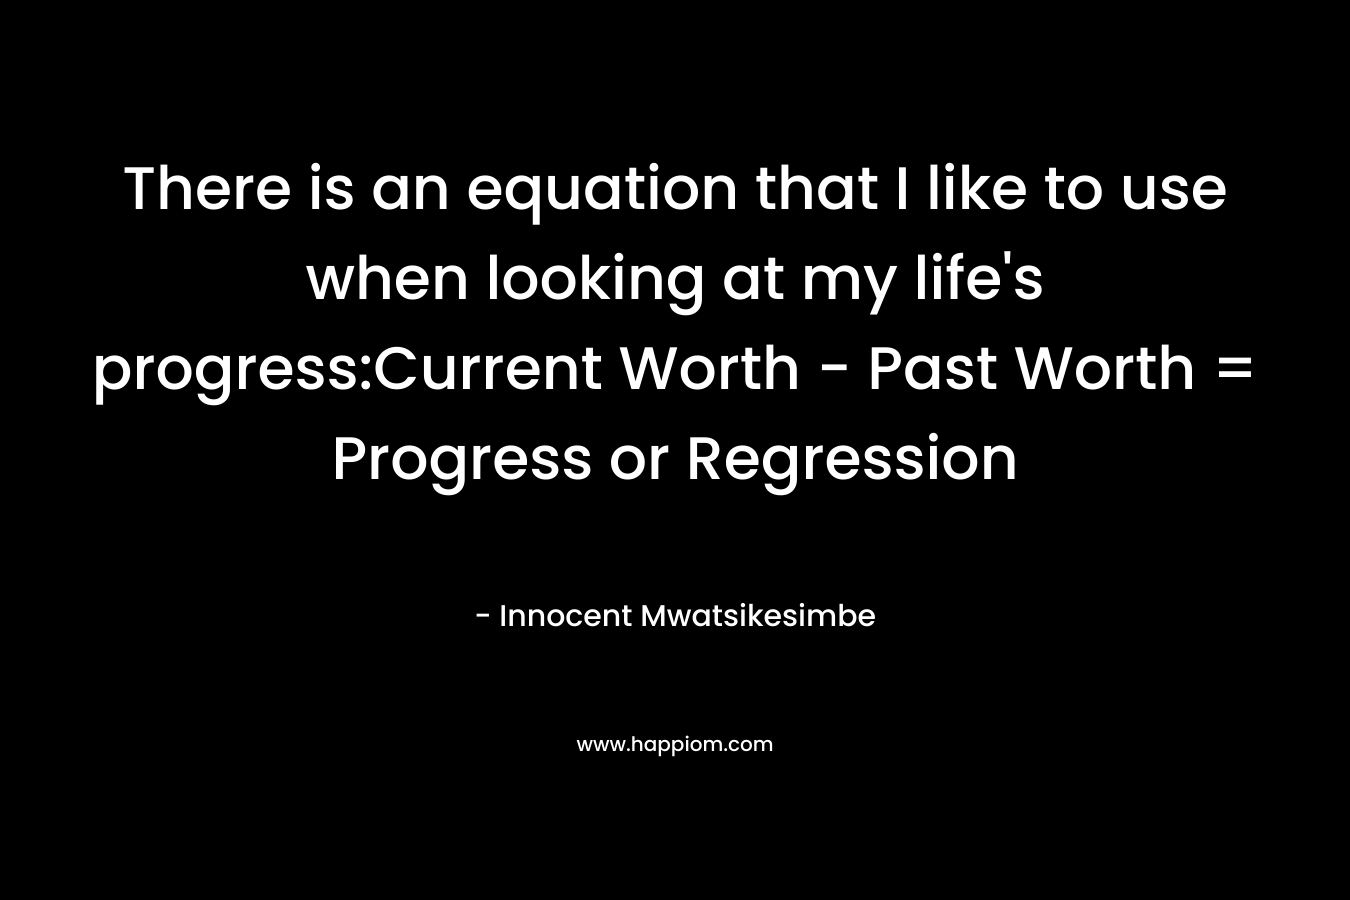 There is an equation that I like to use when looking at my life's progress:Current Worth - Past Worth = Progress or Regression